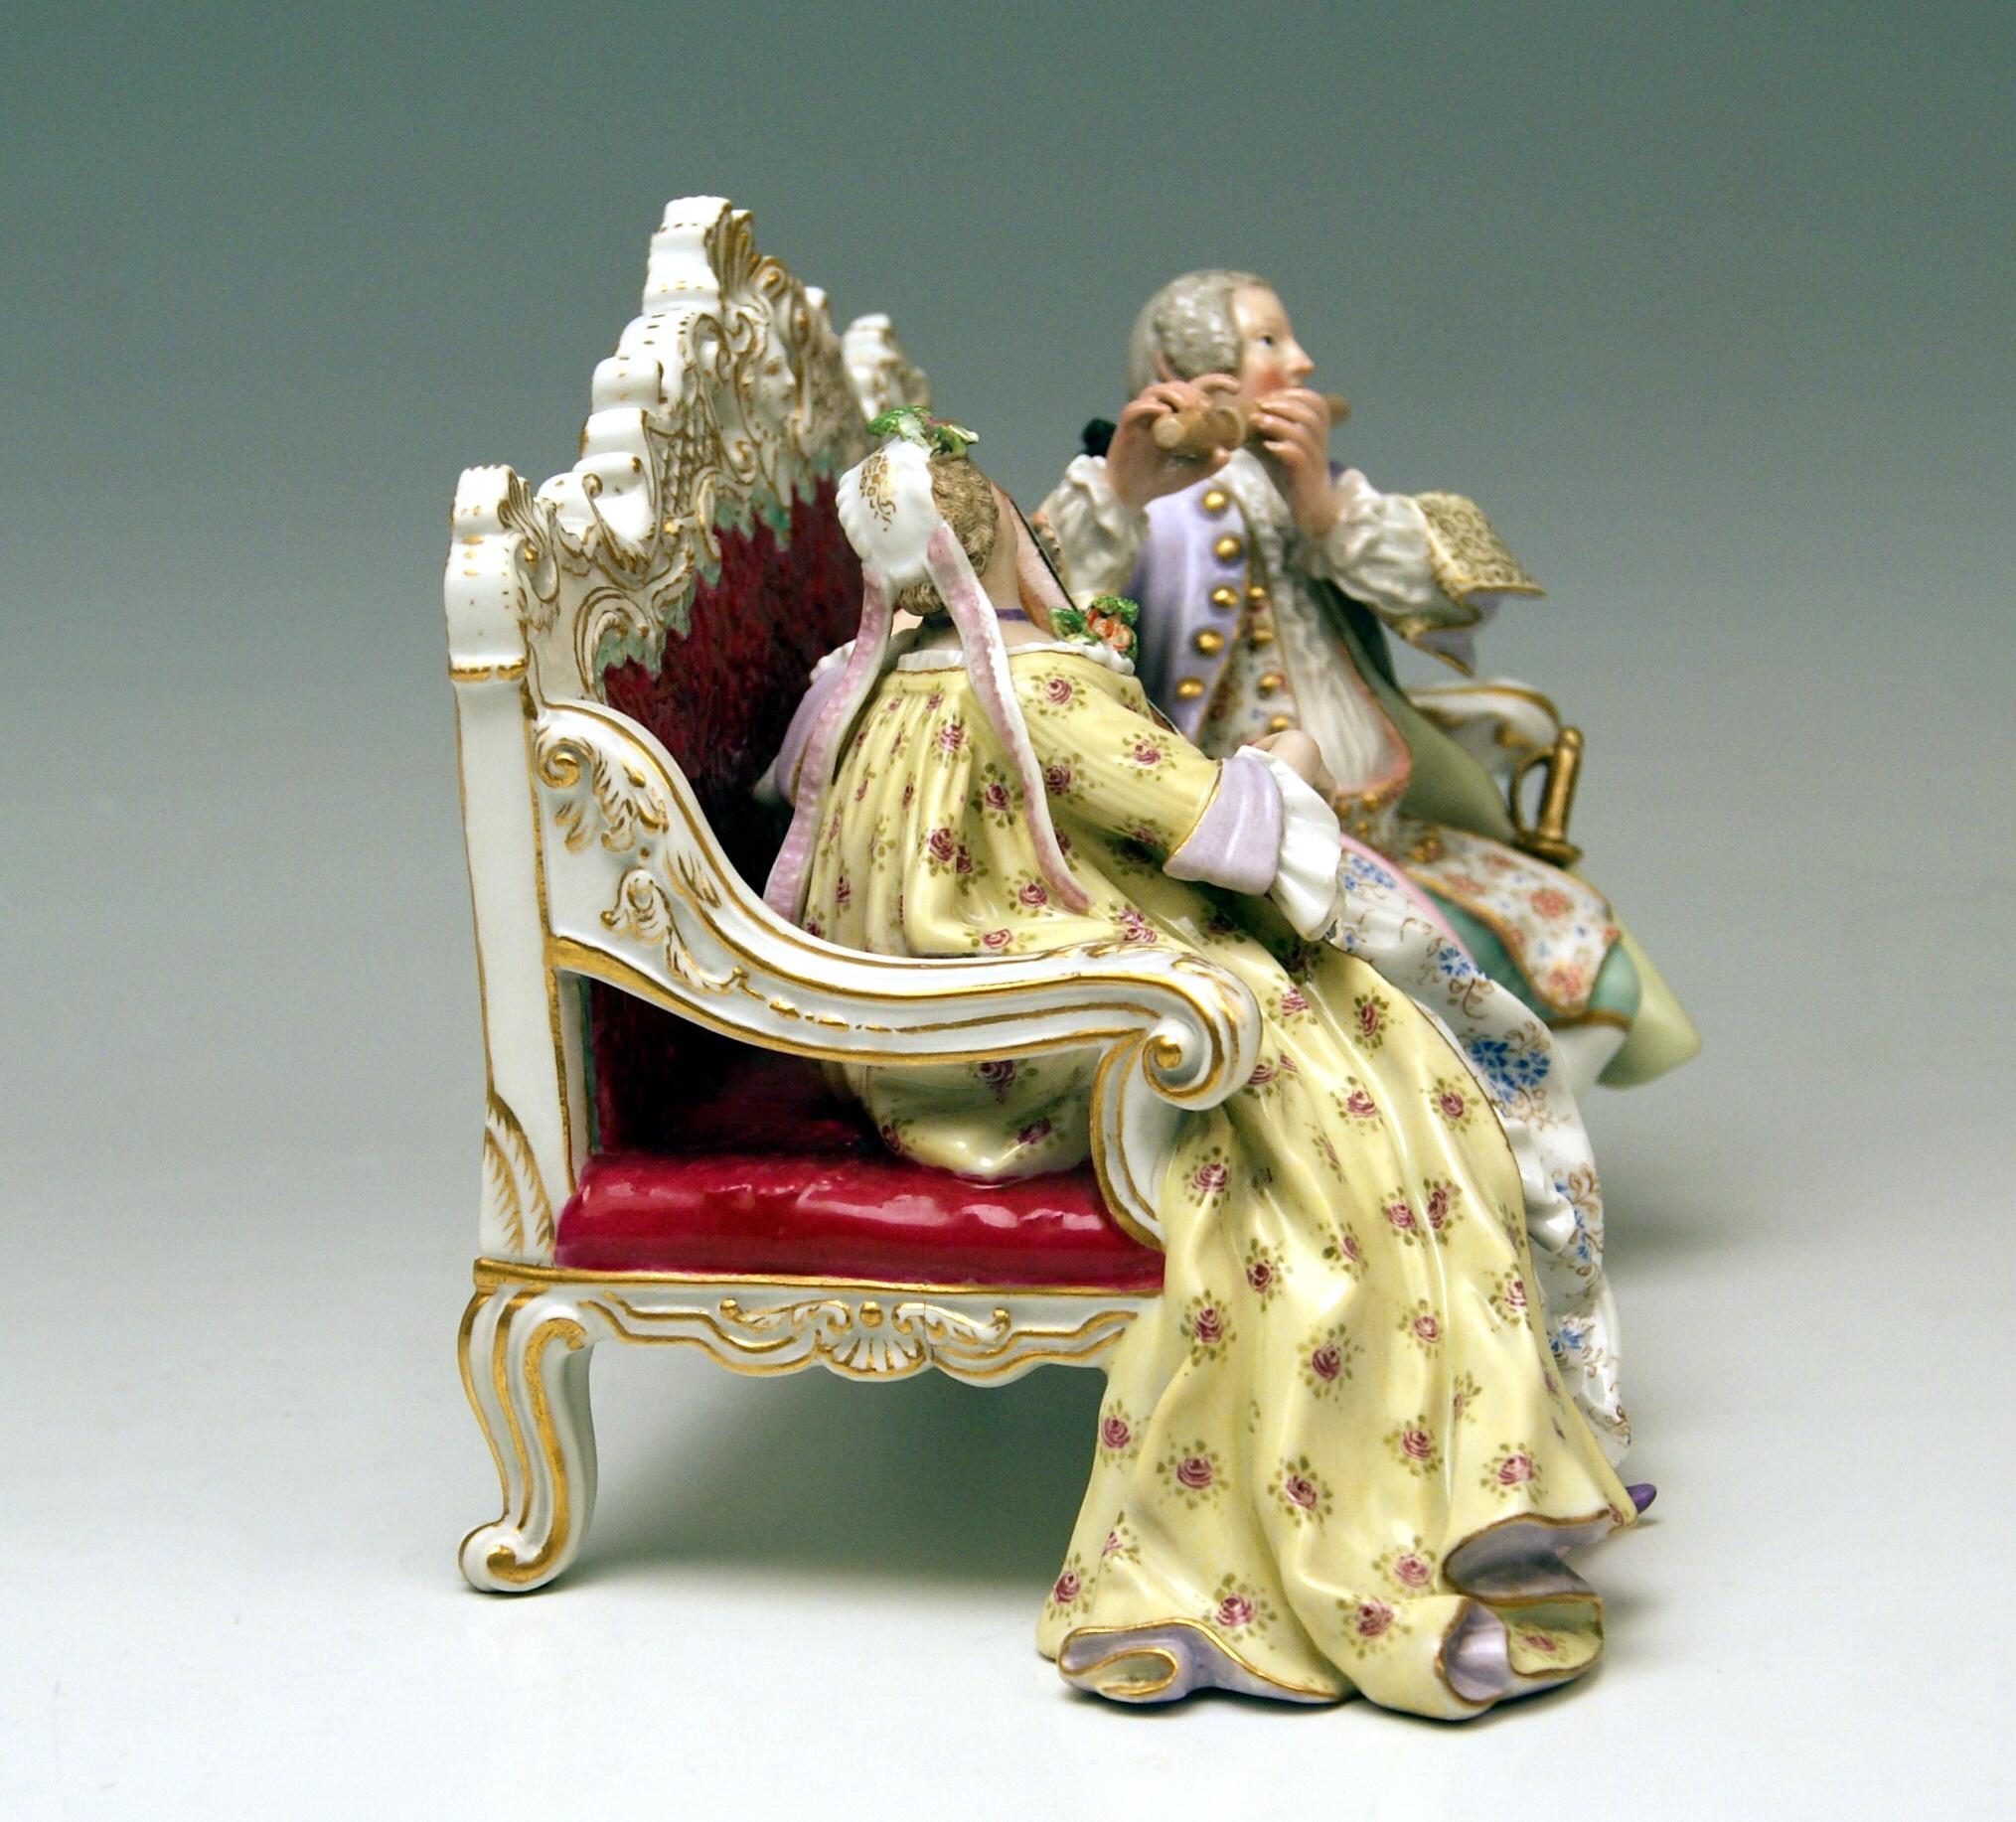 Painted Meissen Couple Musicians on Settee Pug Dog Composer Hasse W 56 Kaendler